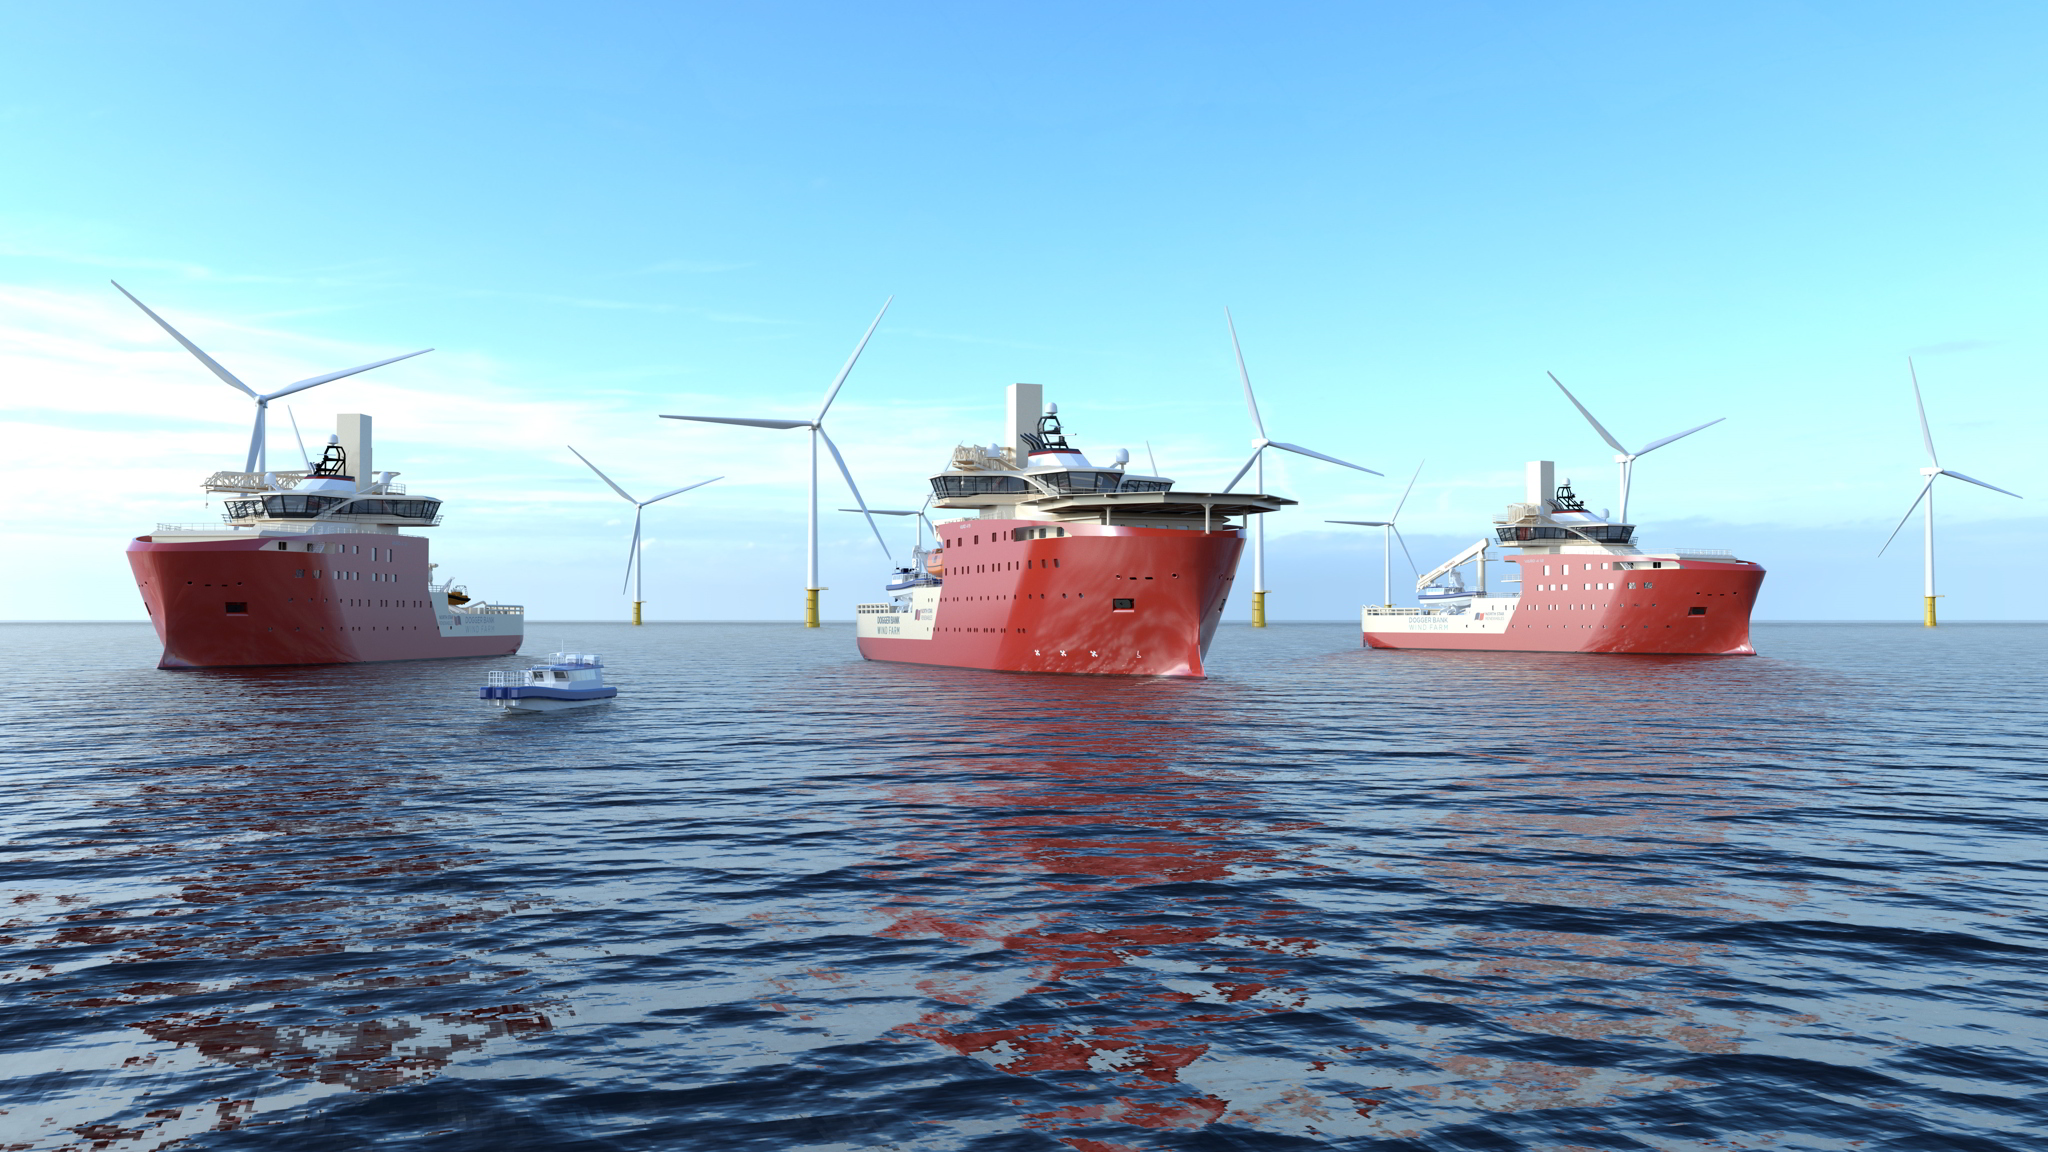 North Star Renewables’ SOVs at an offshore wind farm, artist impression